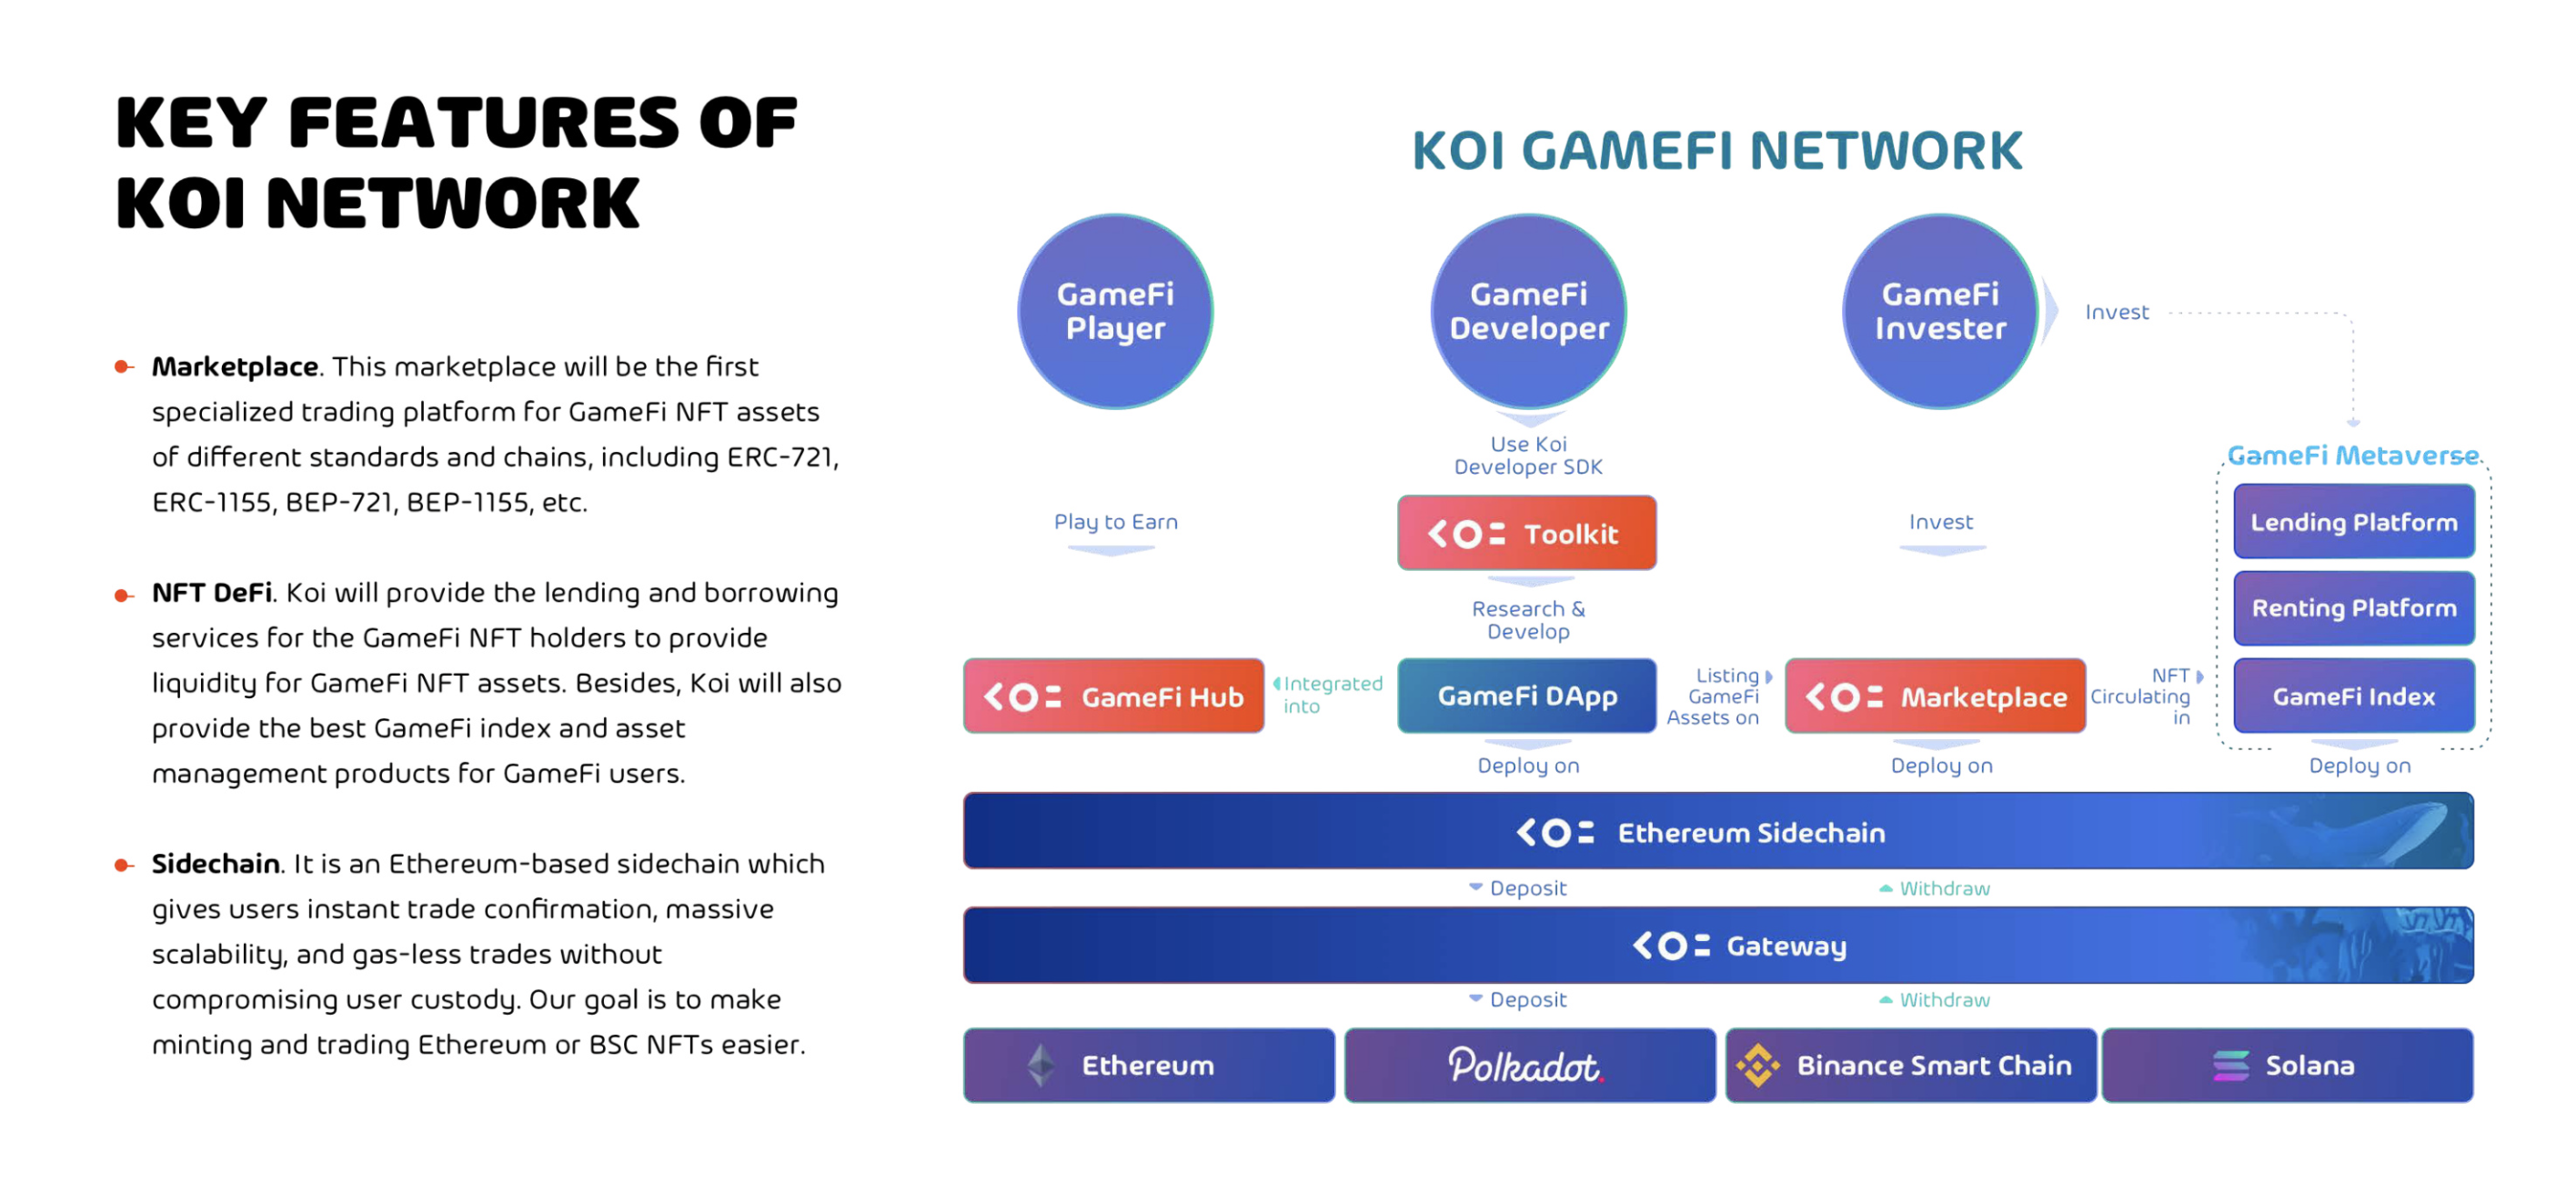 Koi Network Features